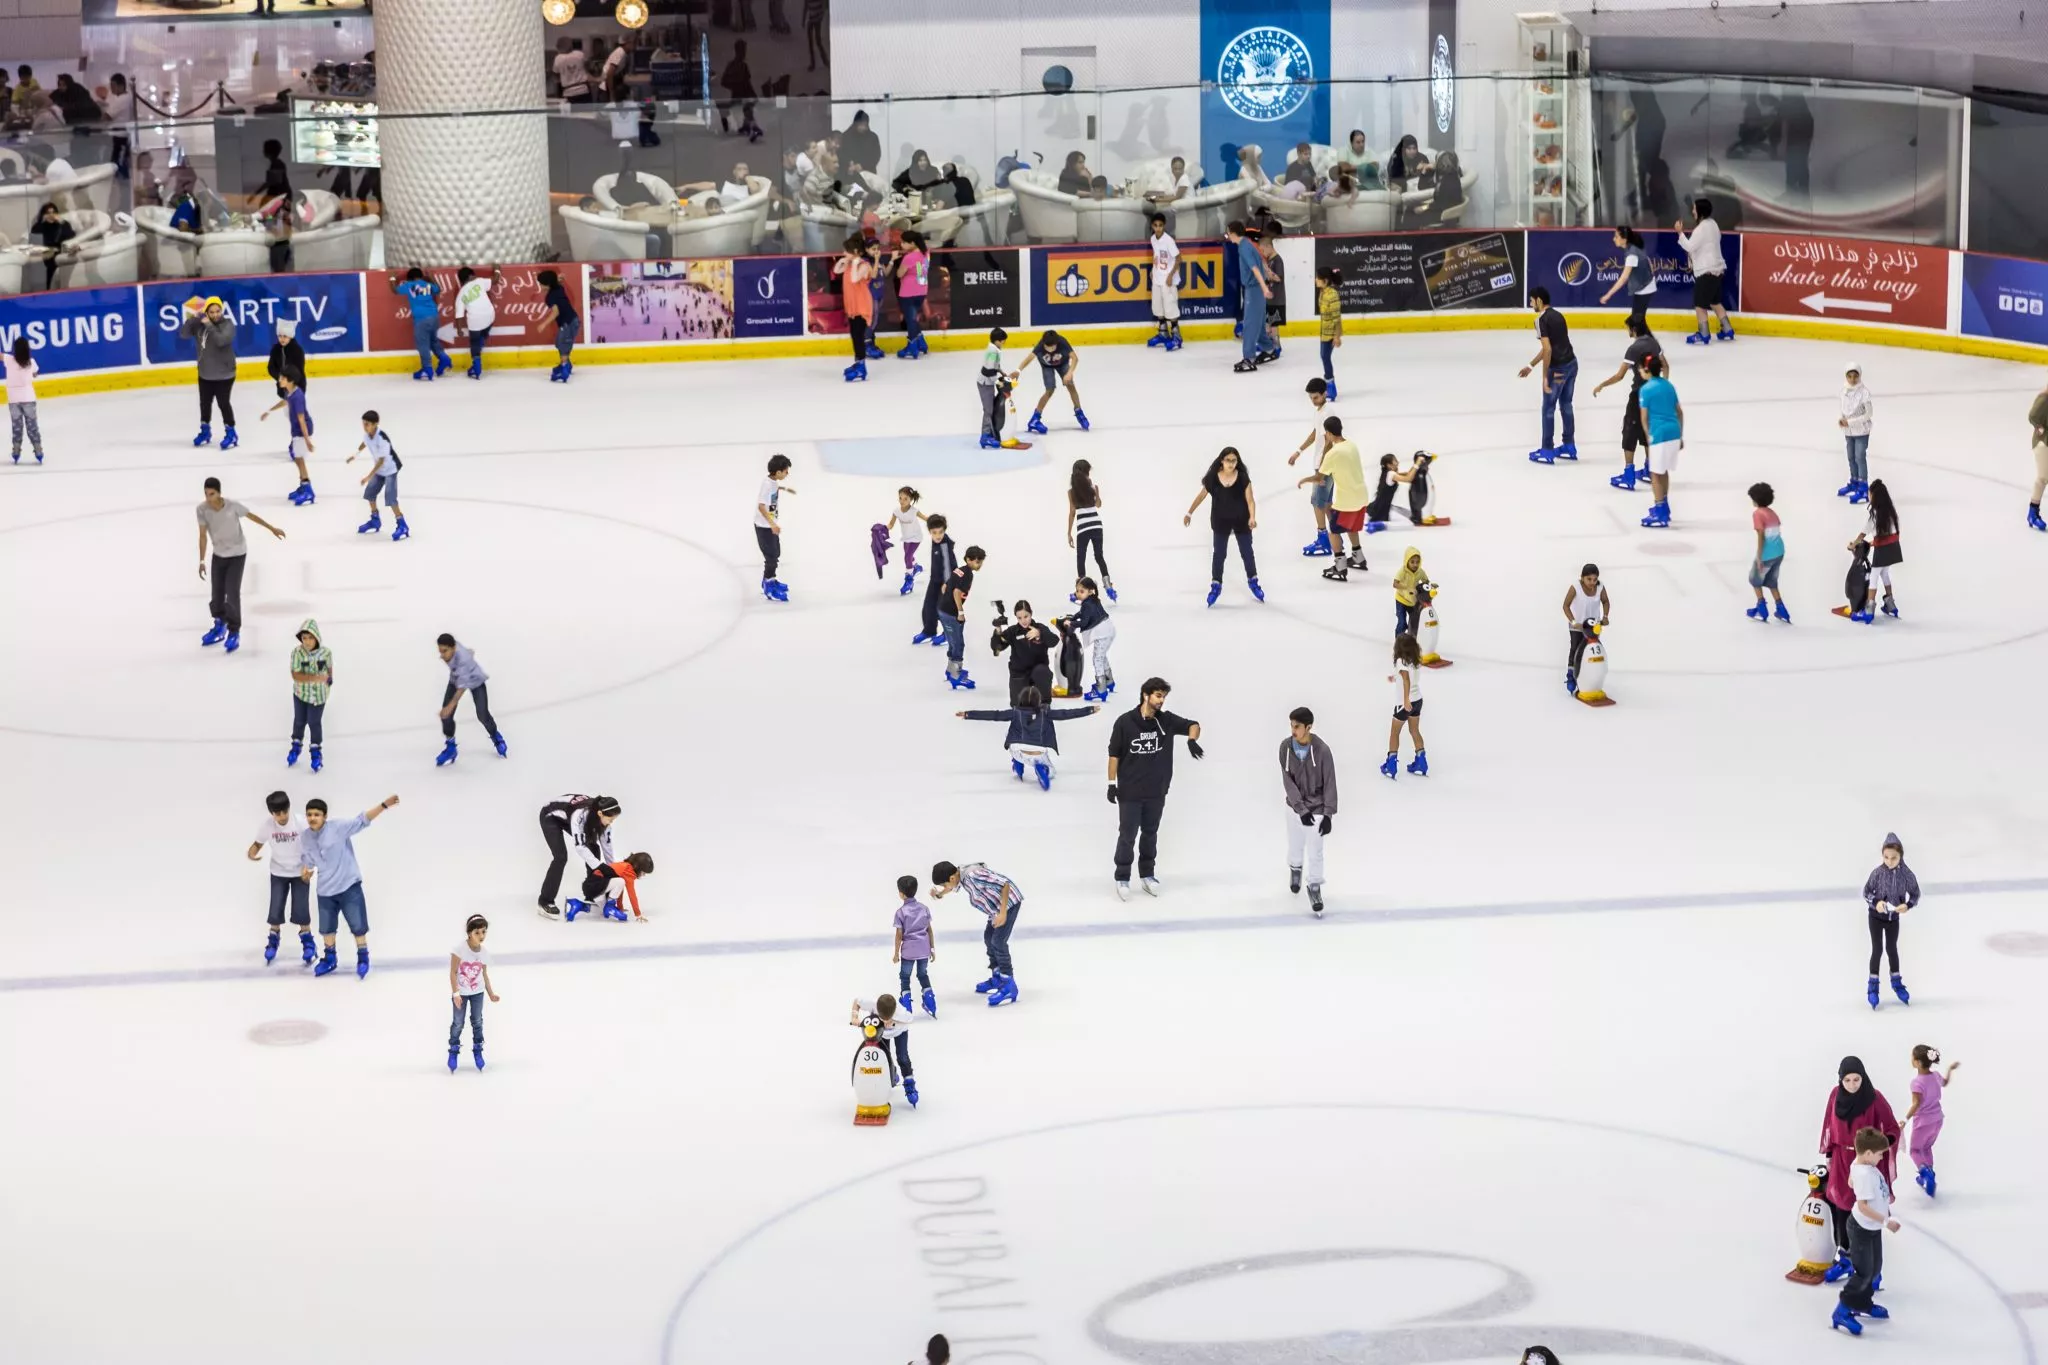 Dubai Ice Rink in United Arab Emirates, Middle East | Skating - Rated 6.2